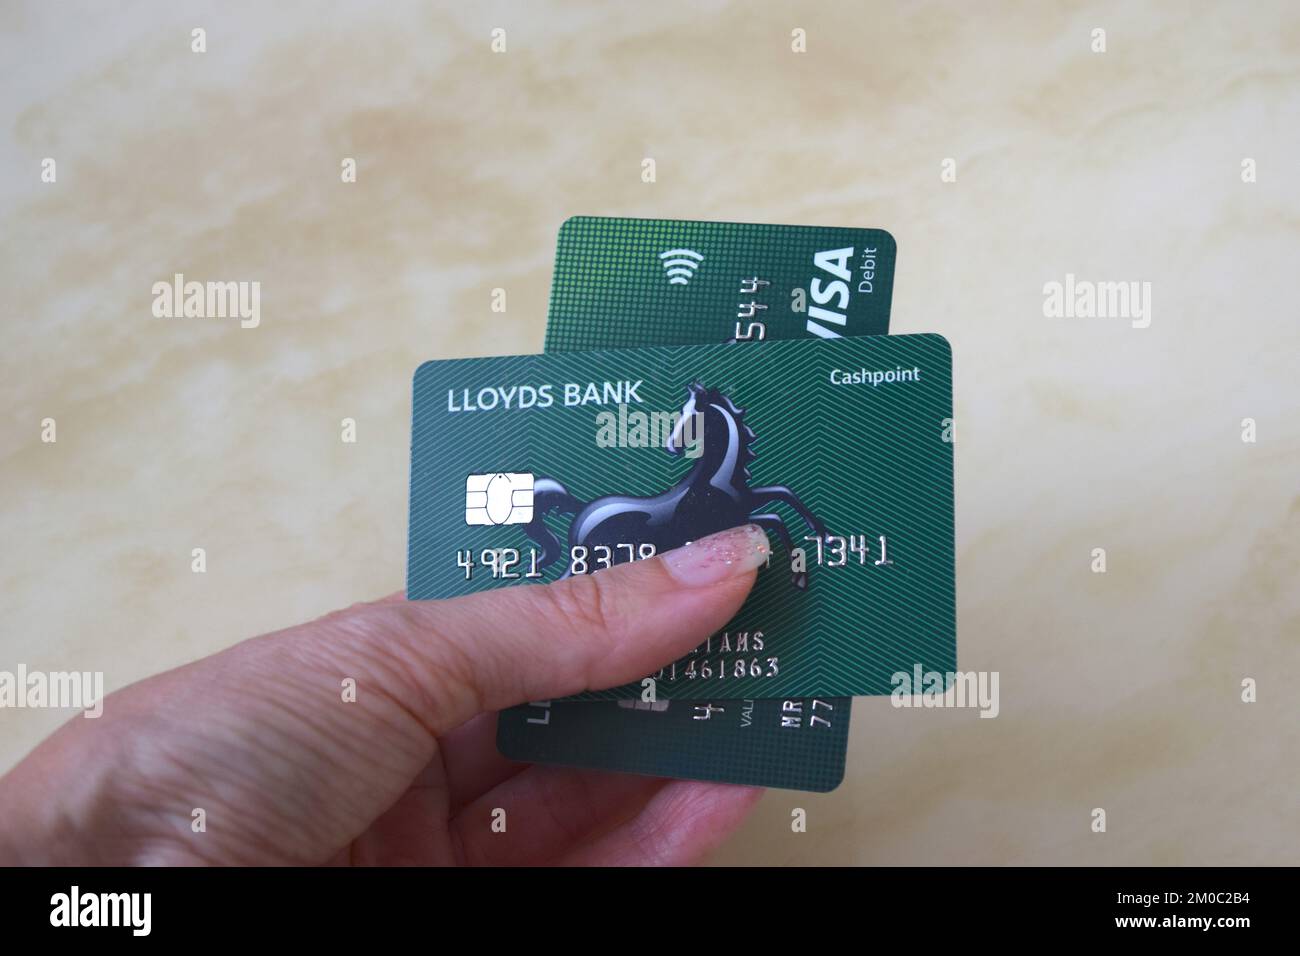 Lloyds bank card in hand on light background. Stock Photo